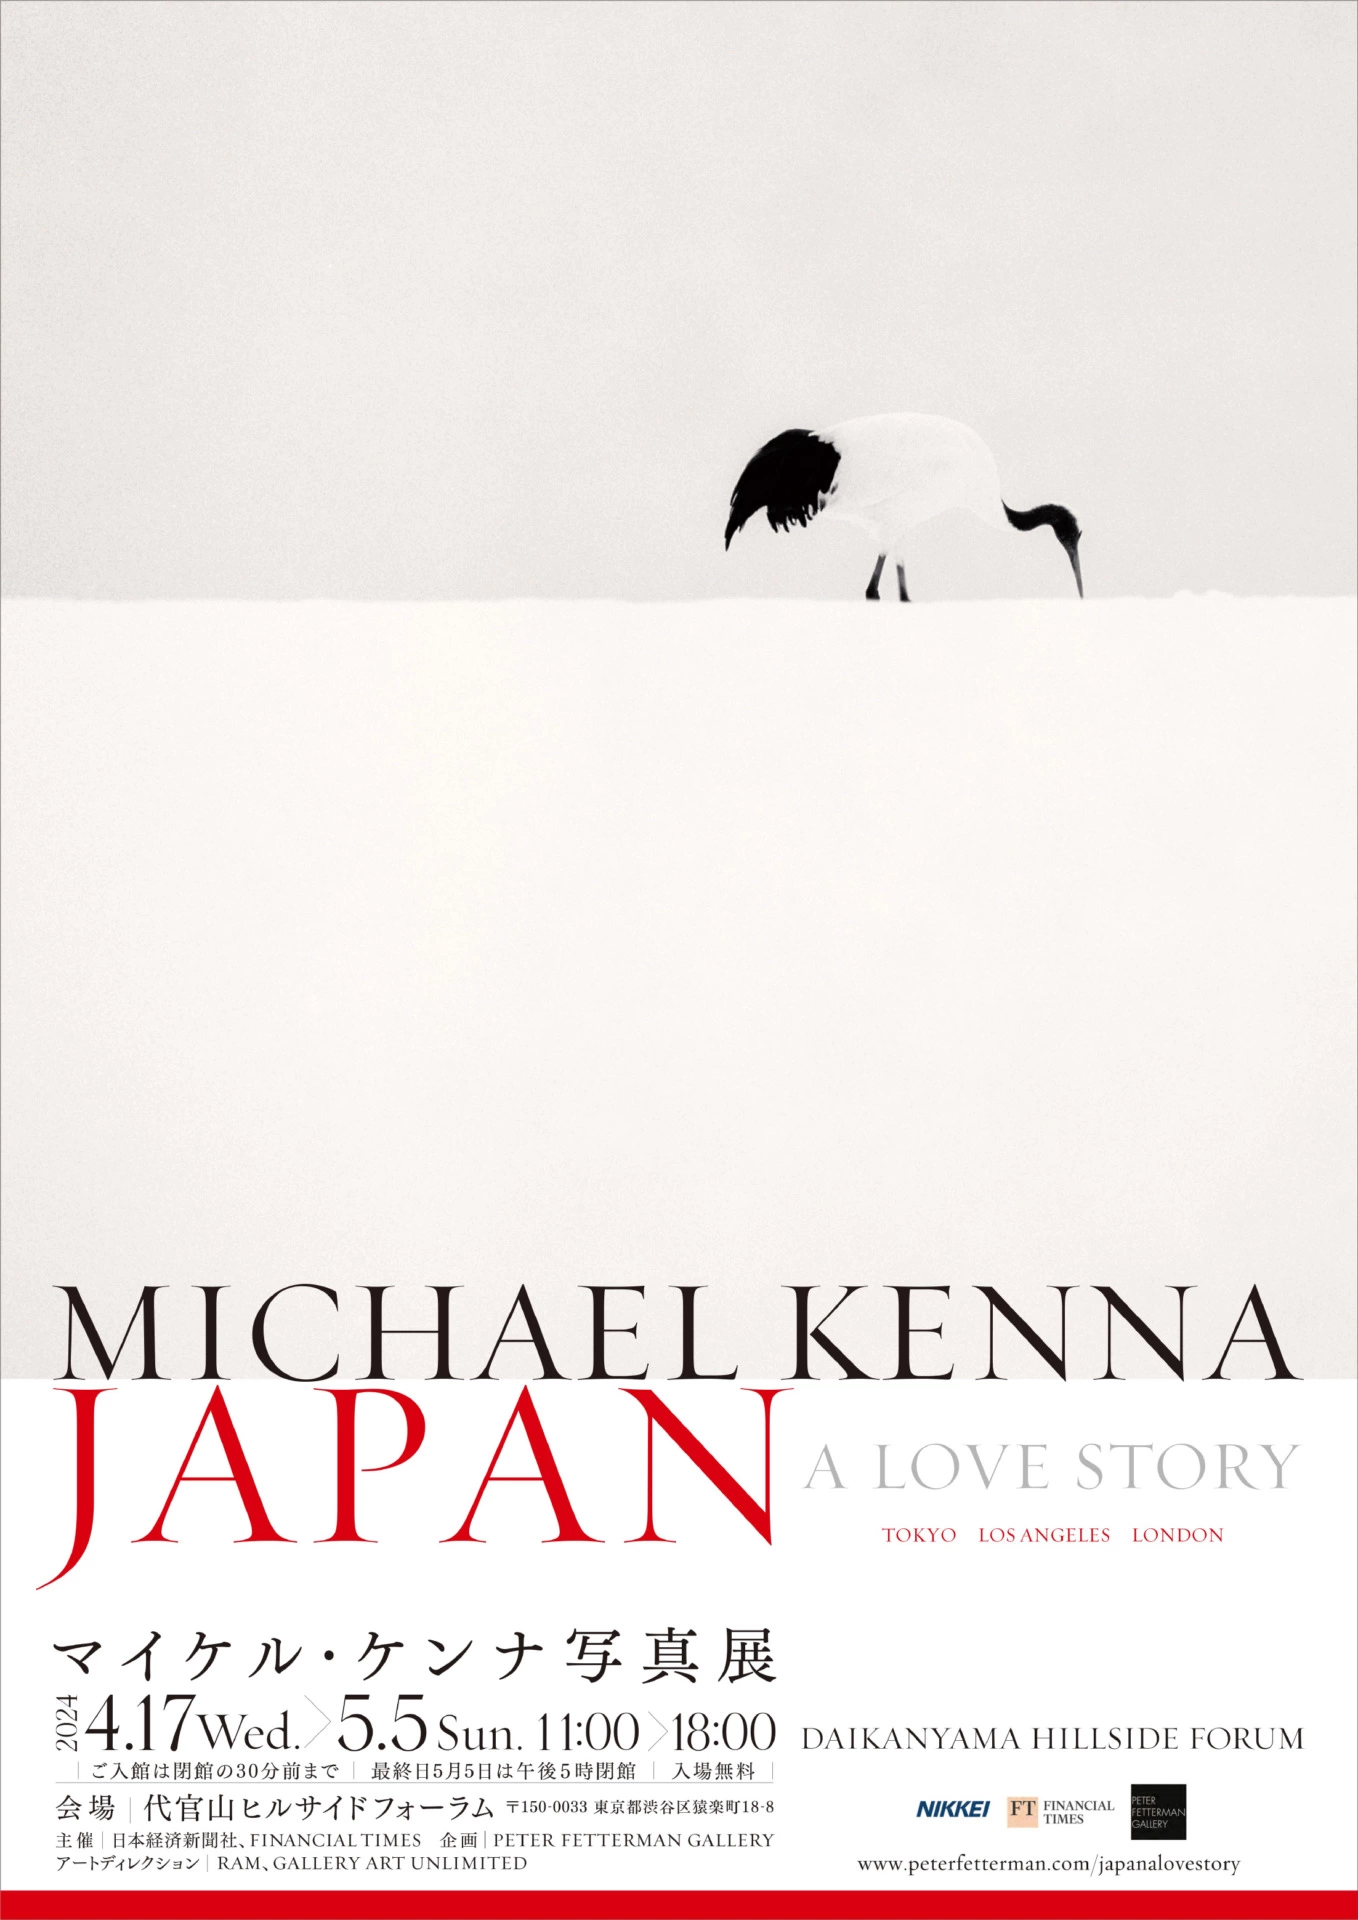 JAPAN A Love Story 100 P hotographs by Michael Kenna